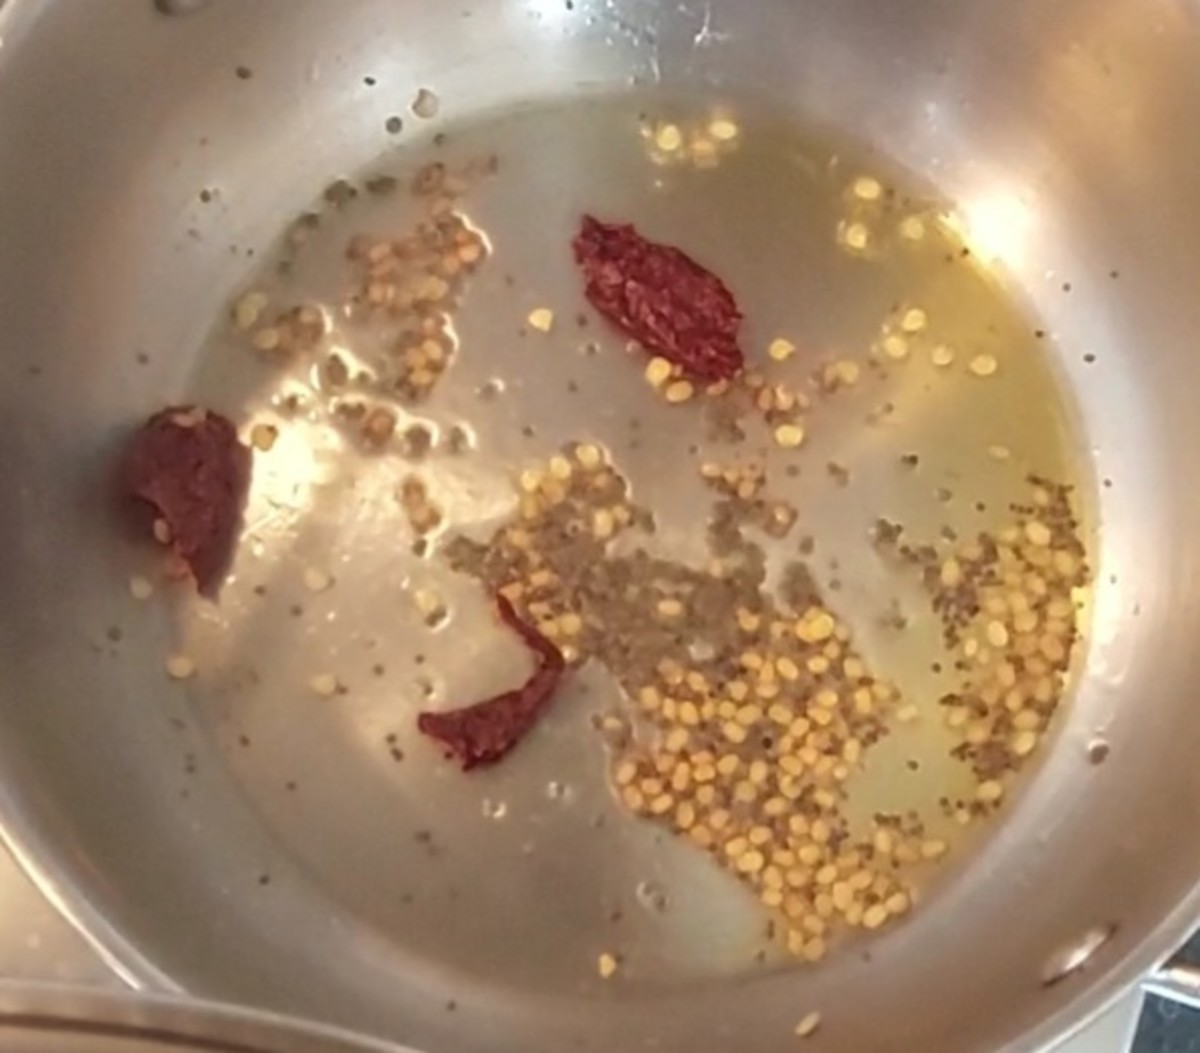 In a frying pan, heat 1 teaspoon ghee and splutter 1/2 teaspoon mustard seeds. Add 1/2 teaspoon urad dal and saute till golden brown. Add 1-2 broken red chilies and 1/4 teaspoon hing. Switch off the flame